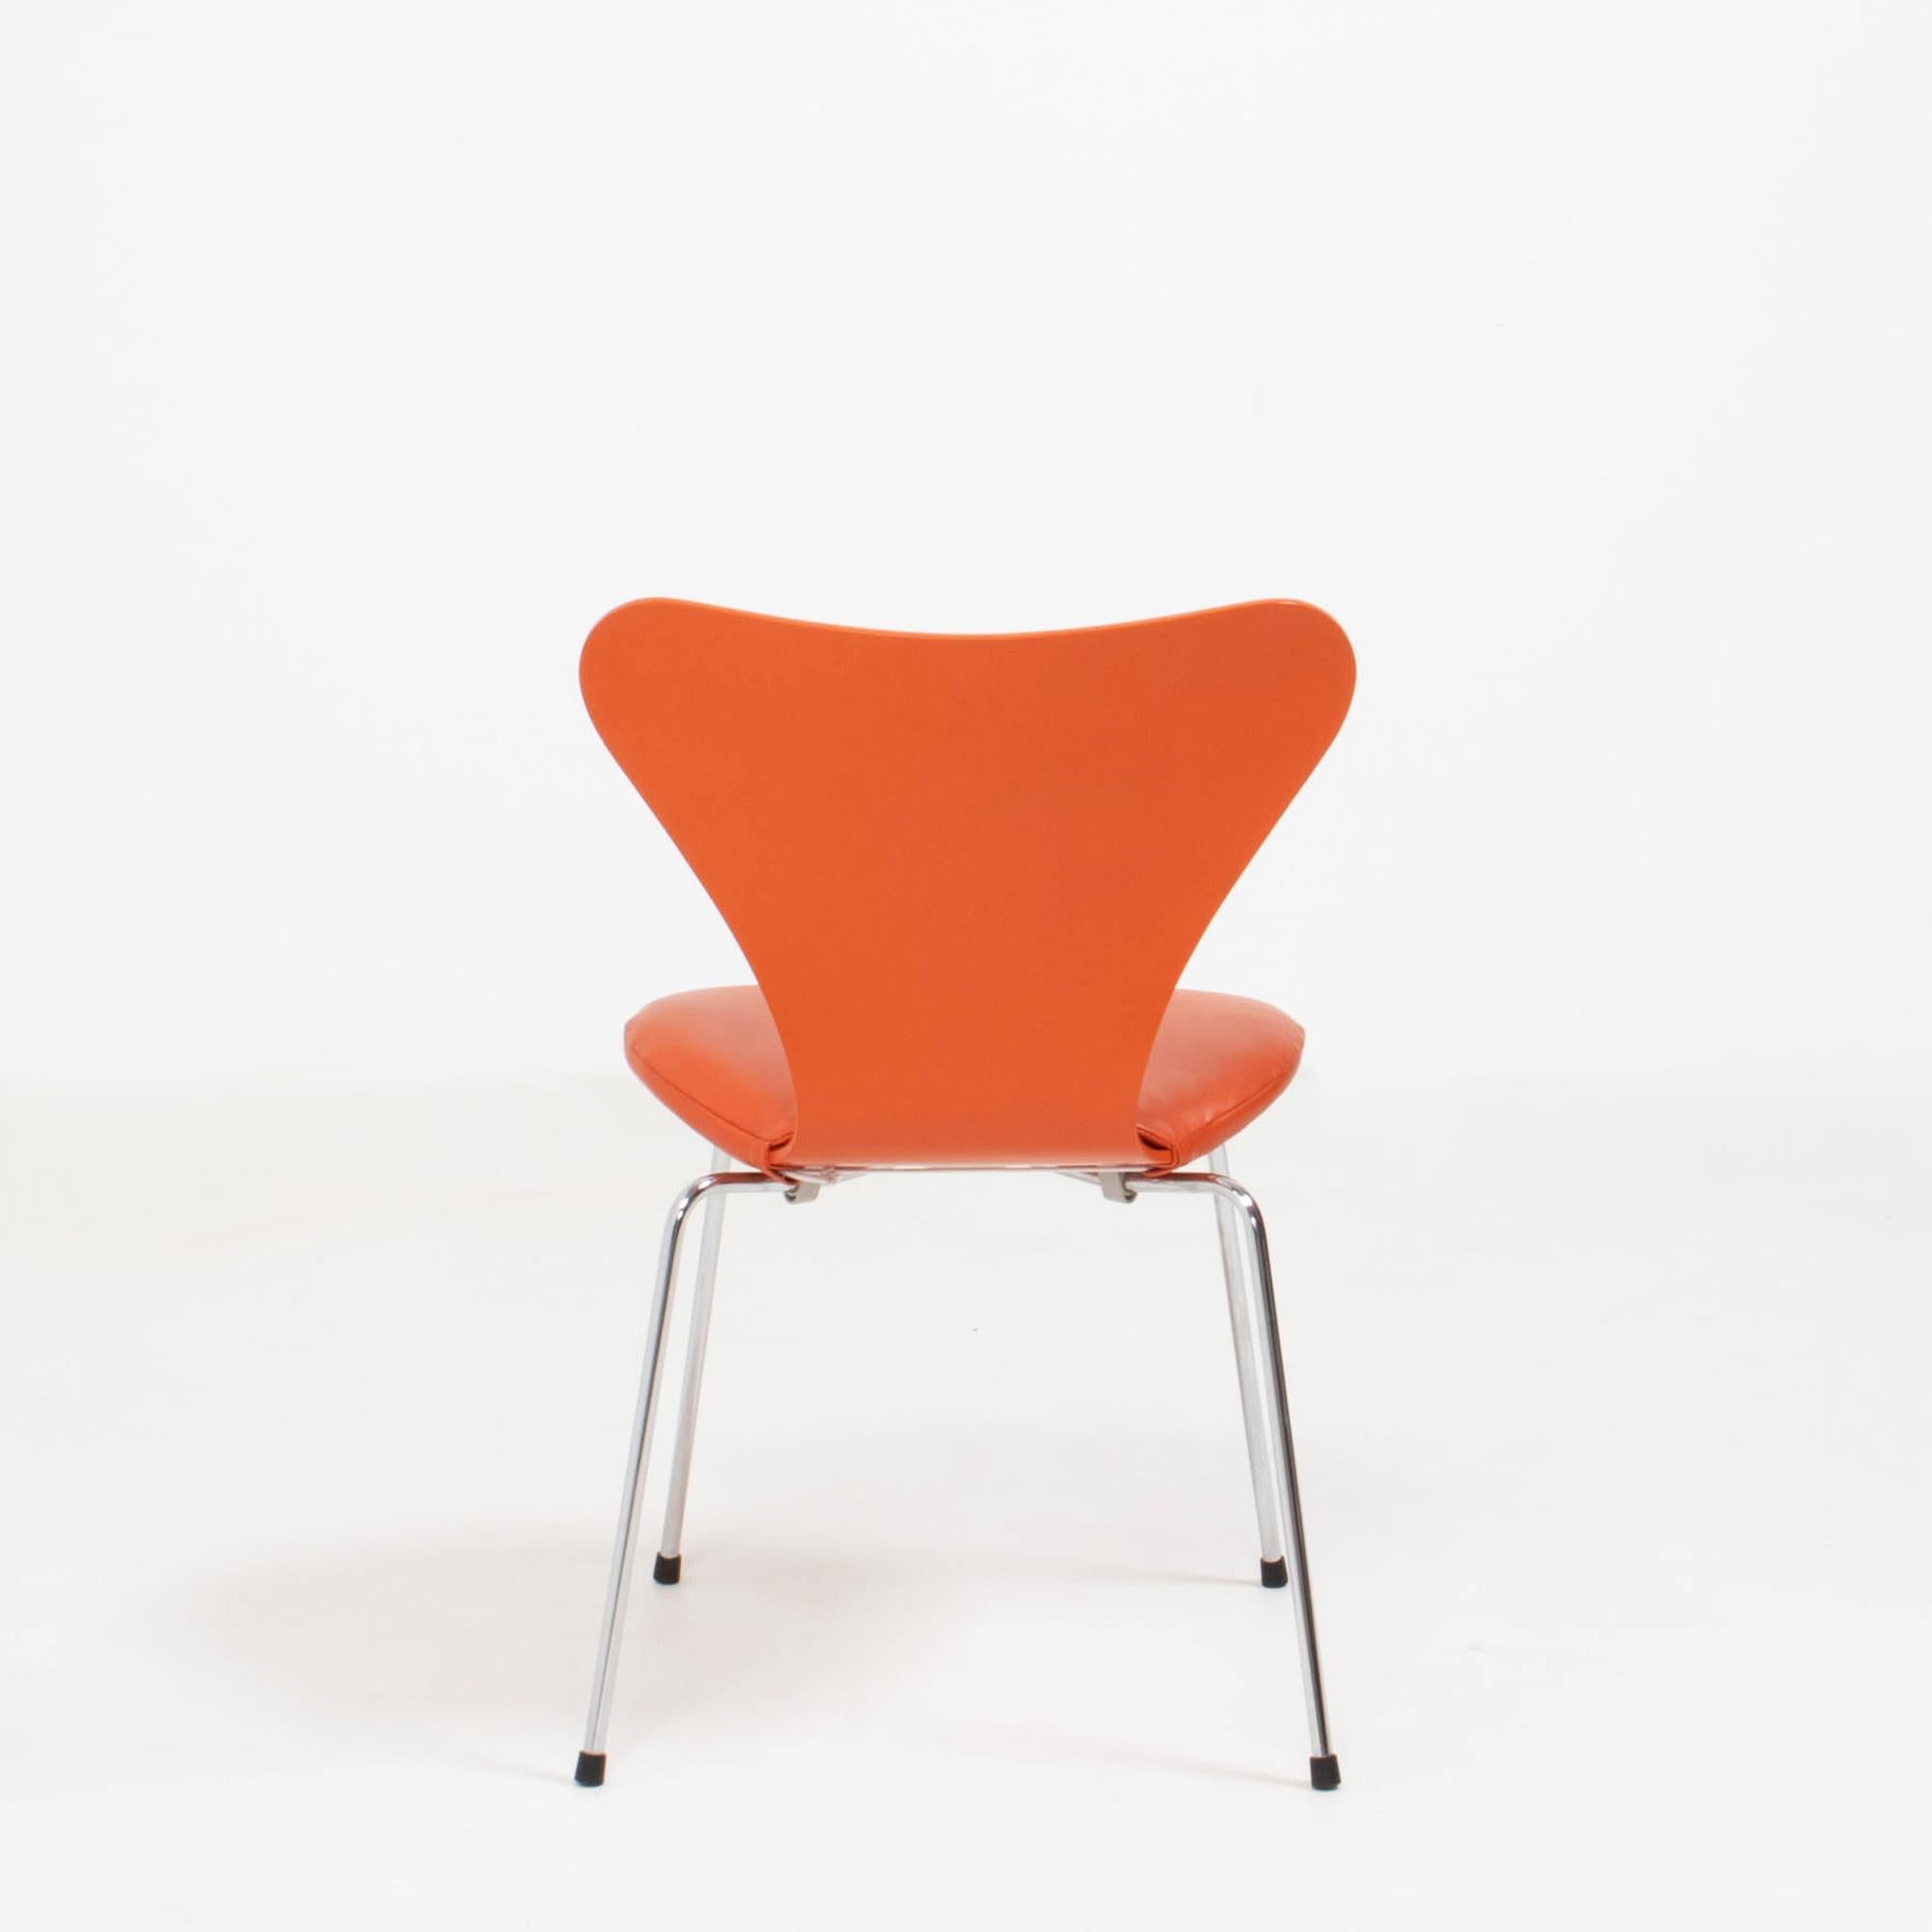 Arne Jacobsen for Fritz Hansen Orange Leather Series 7 Dining Chair In Good Condition For Sale In London, GB